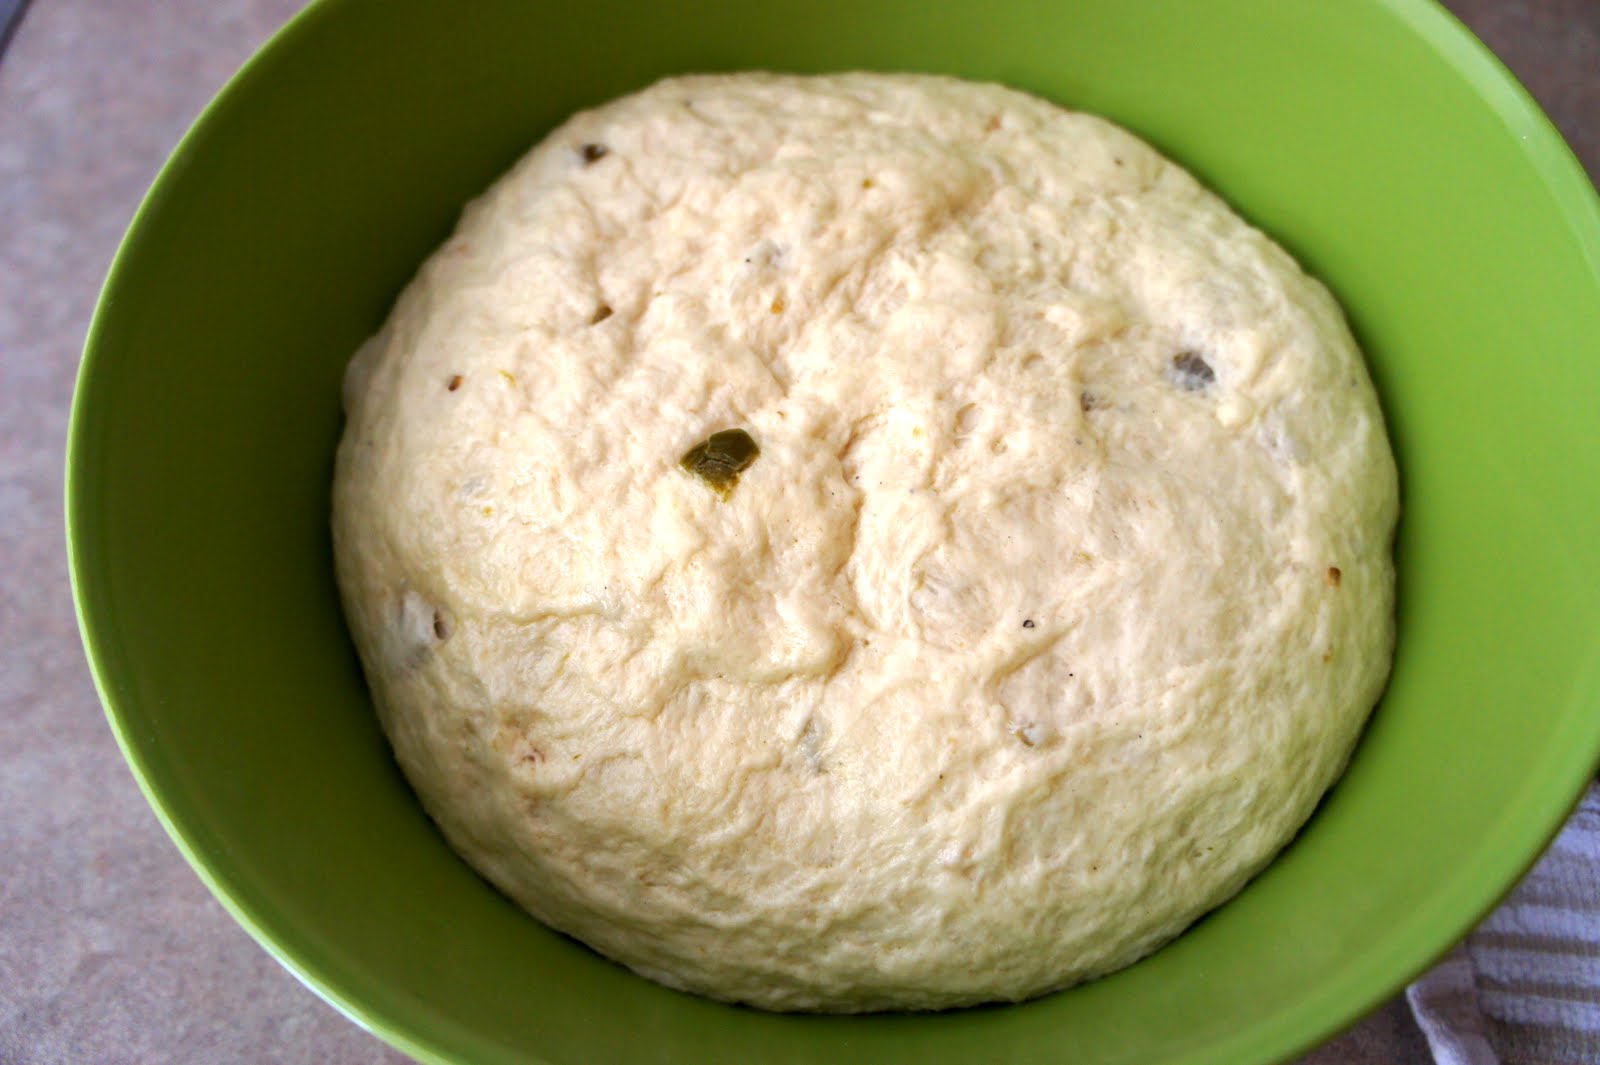 A close up of Jalapeño Cheddar Bagel dough in a bowl, after it has been rising